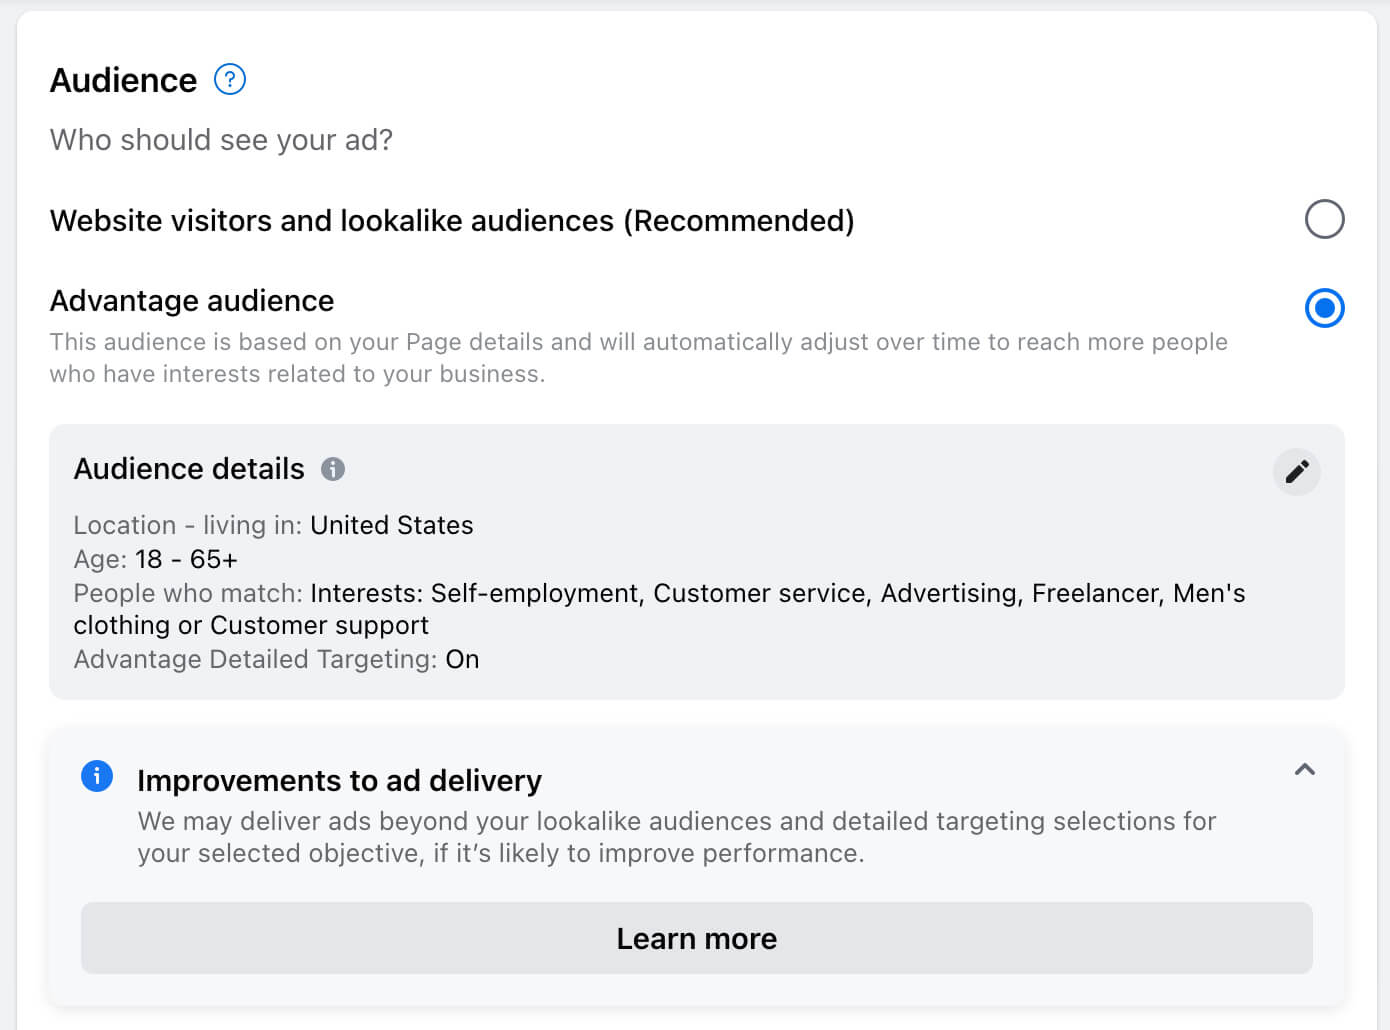 how-to-promote-your-book-now-or-reserve-action-buttons-with-paid-facebook-campaigns-automatically-creates-website-visitors-and-lookalike-audiences-example-27